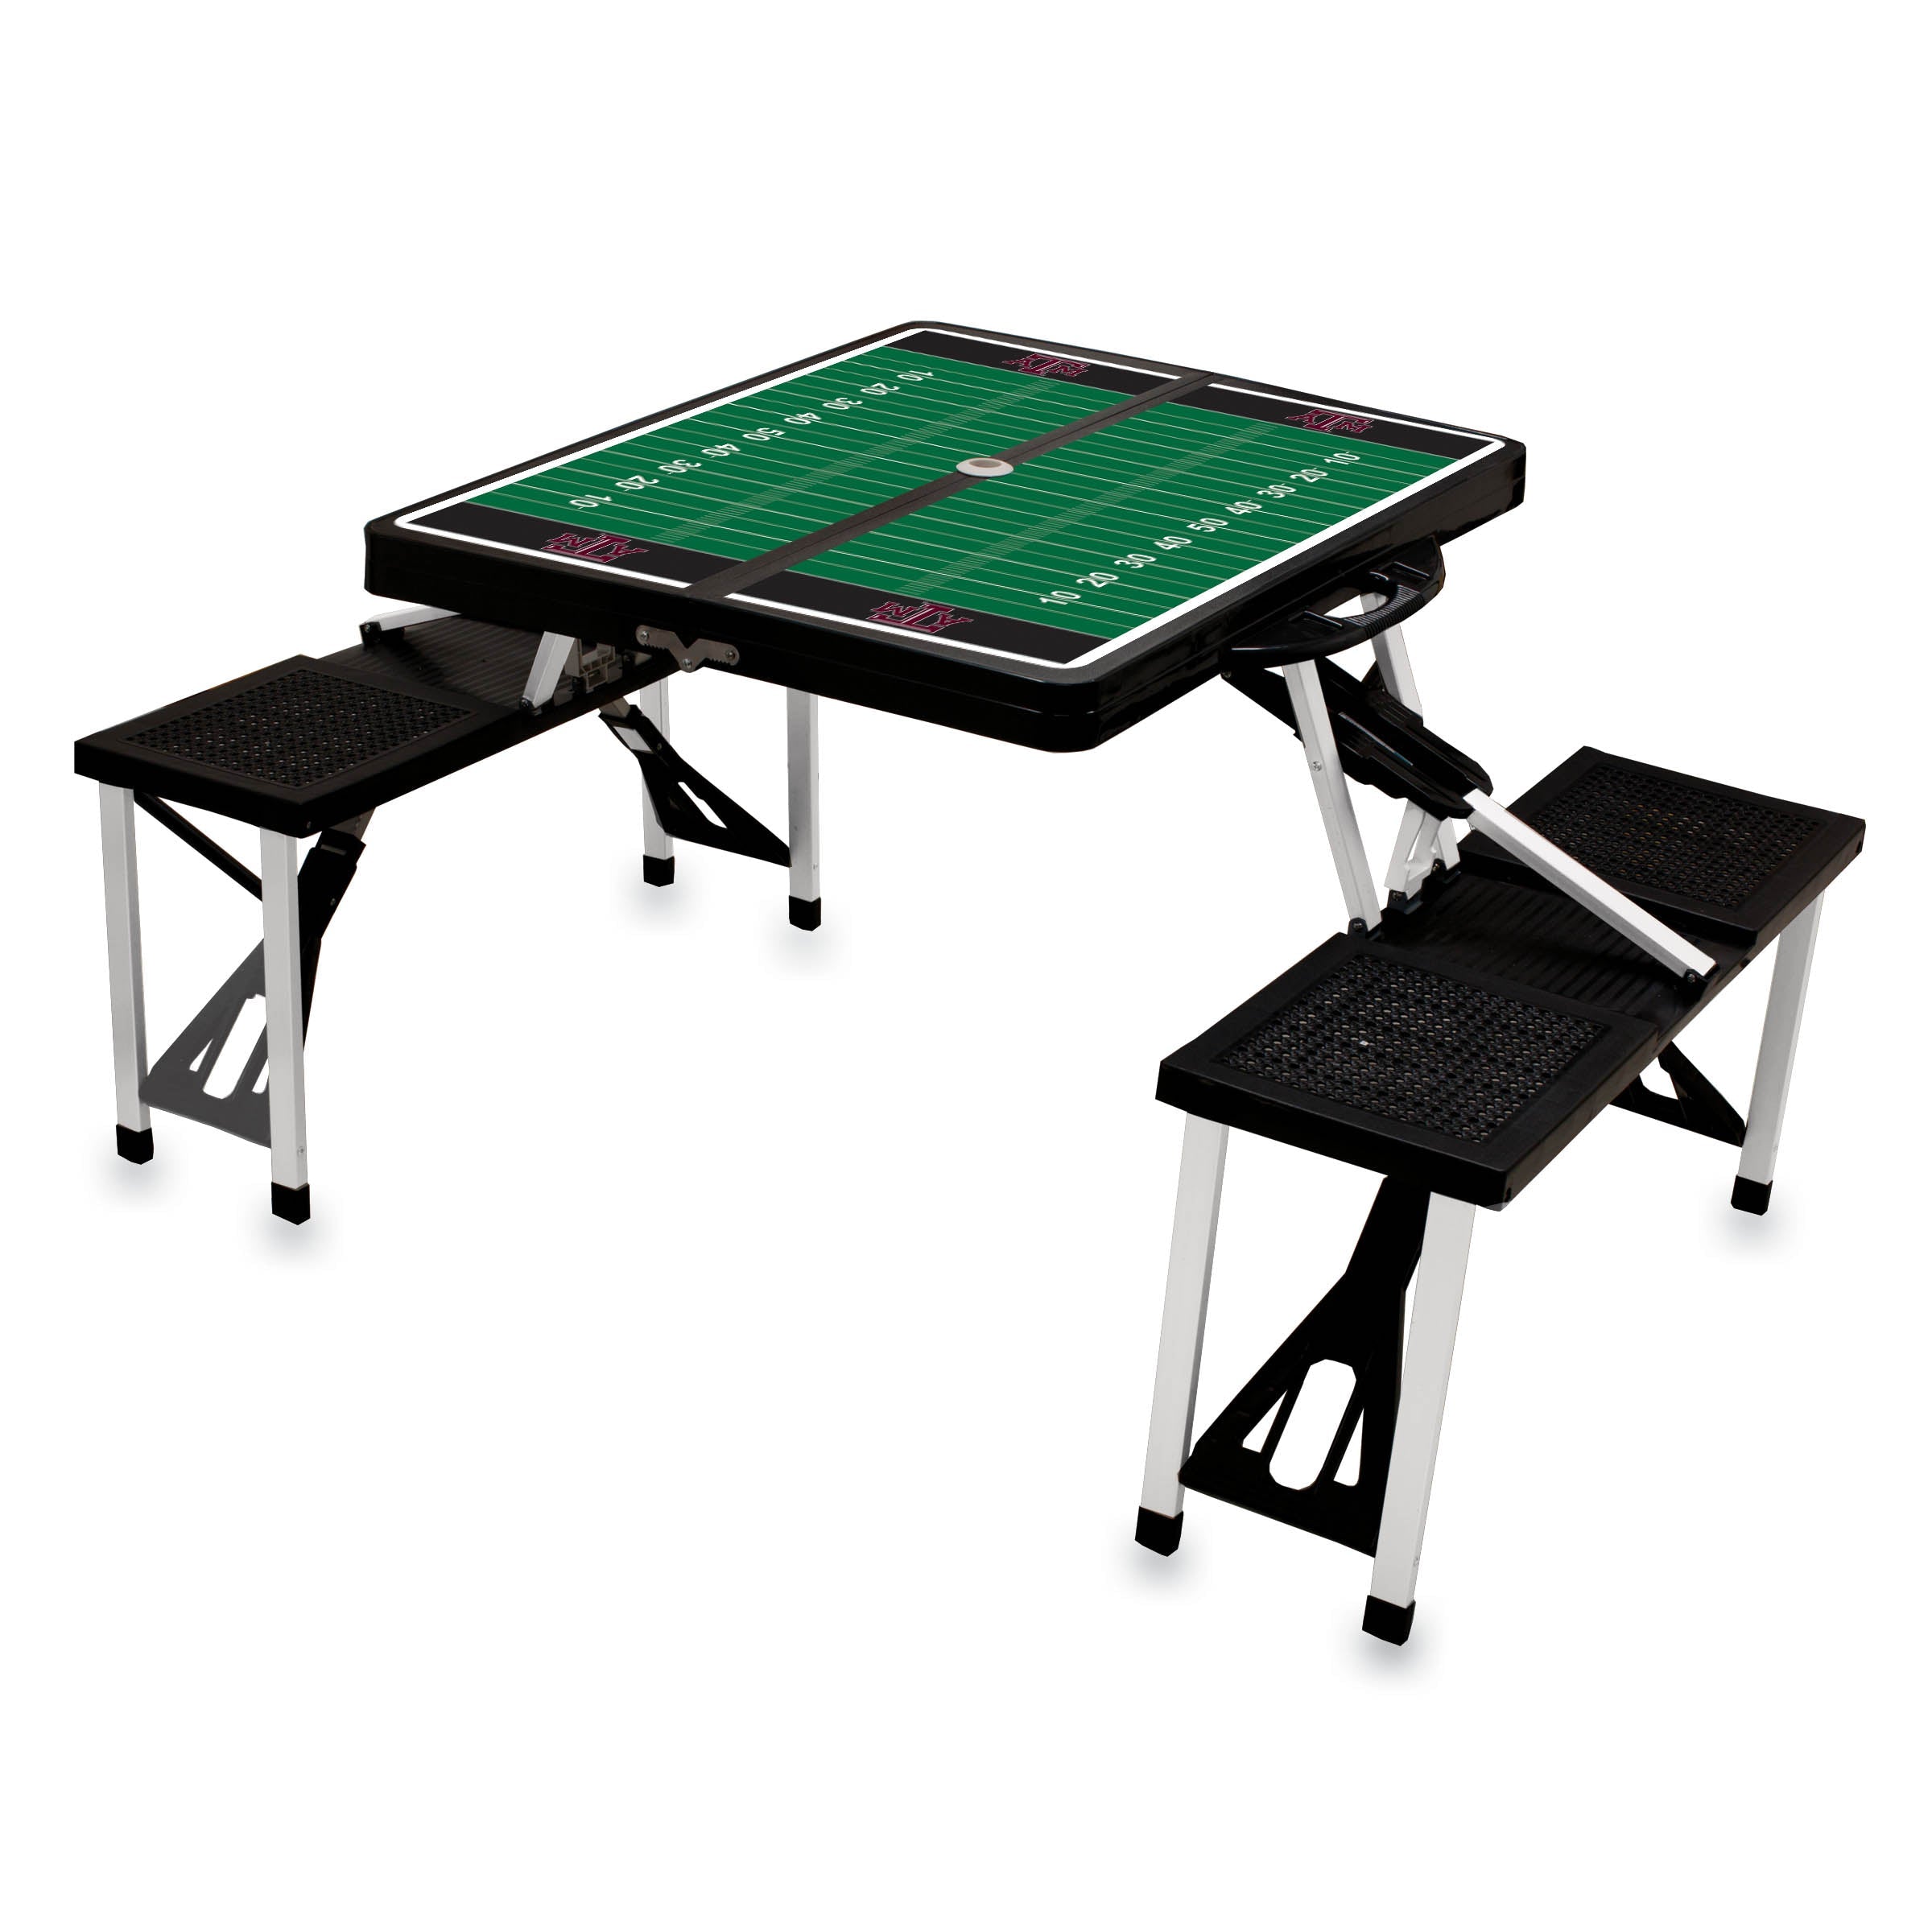 Football Field - Texas A&M Aggies - Picnic Table Portable Folding Table with Seats